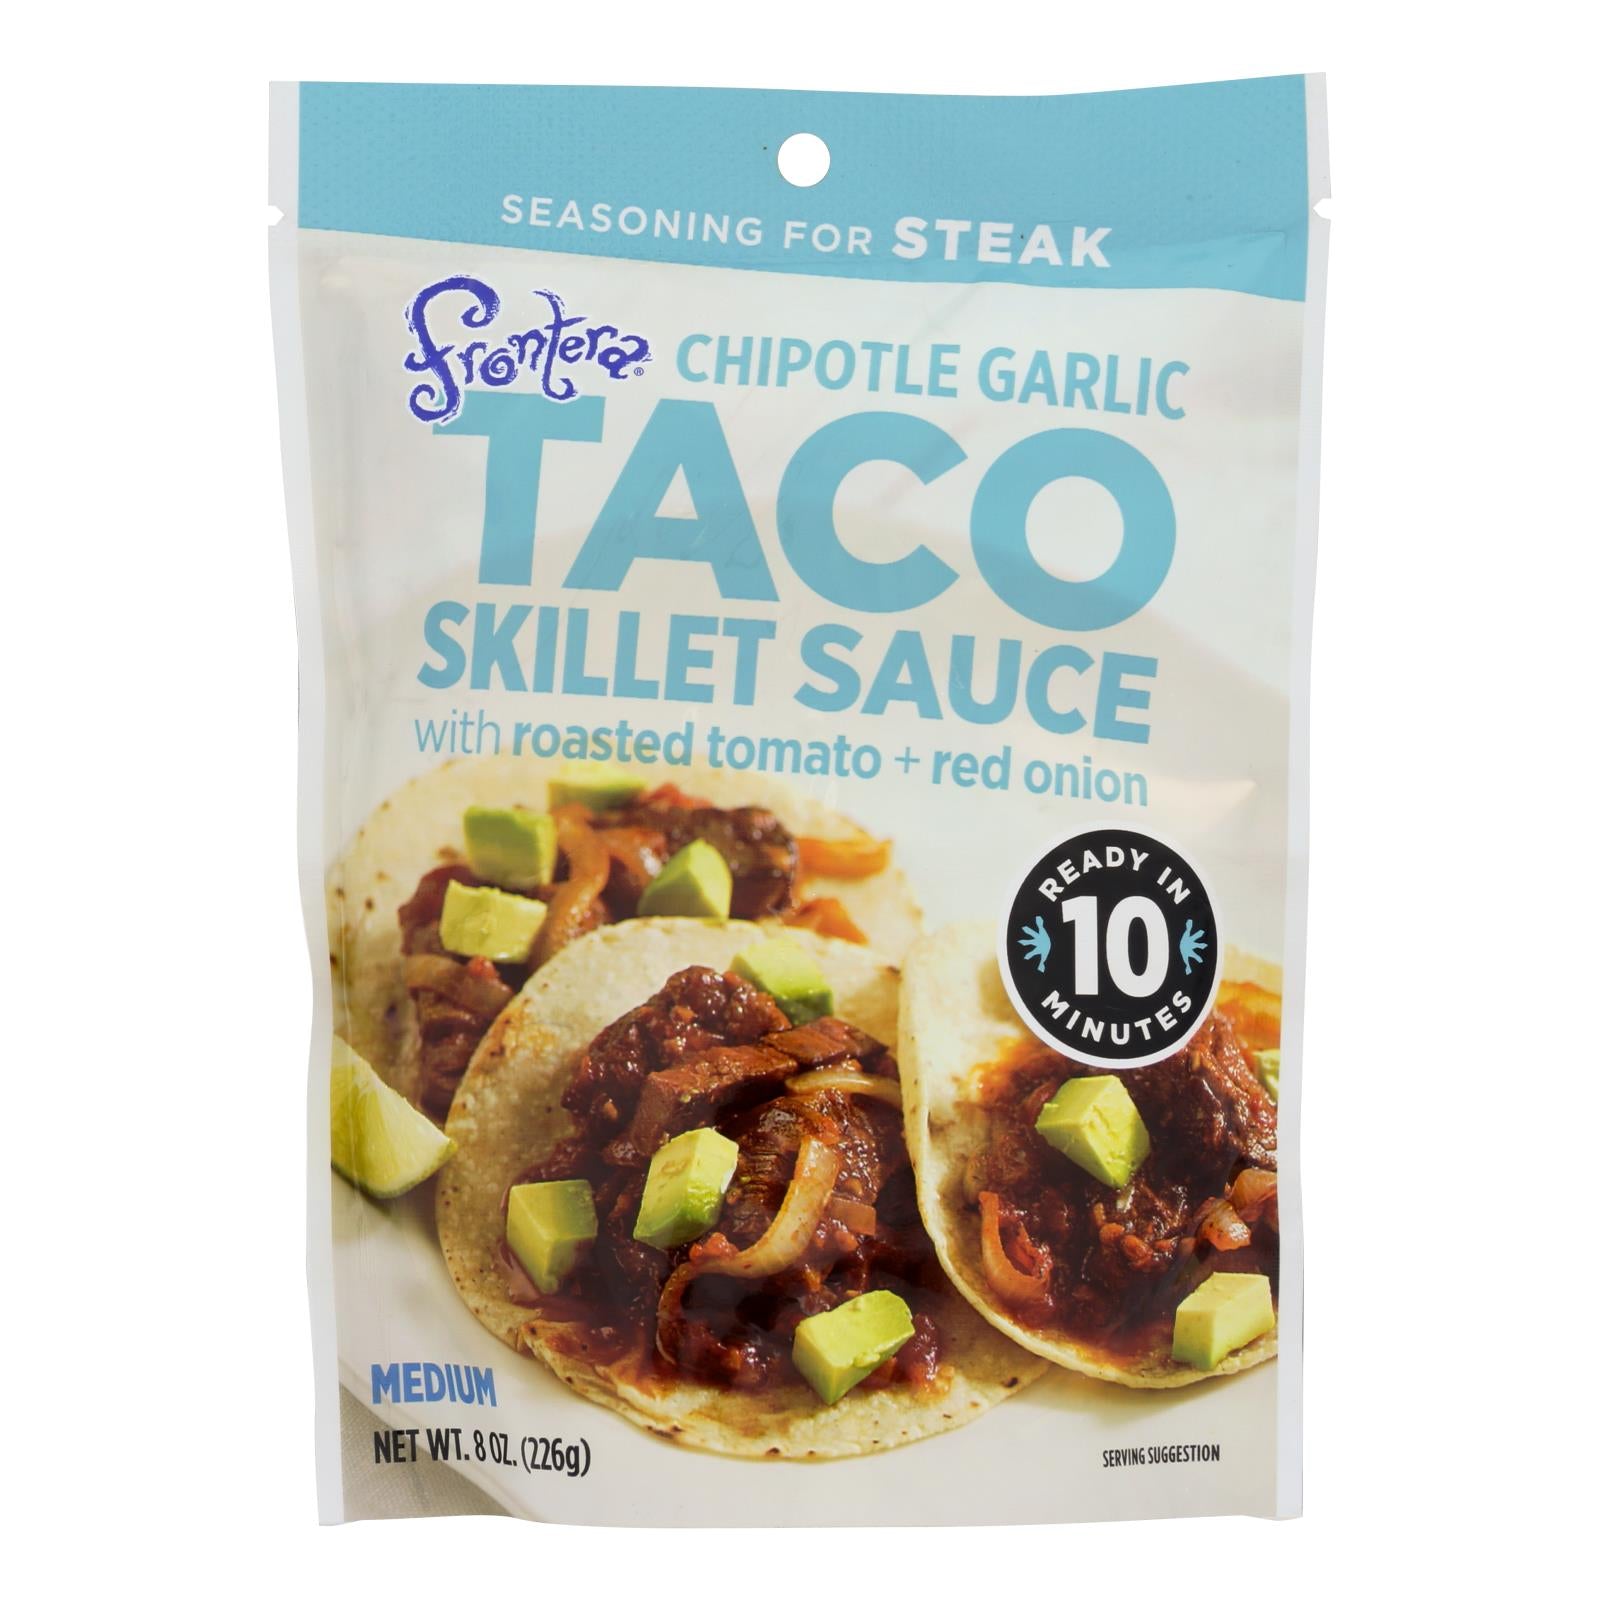 Frontera Foods Chipotle Garlic Taco Skillet Sauce - Skillet Sauce - Case Of 6 - 8 Oz. - Whole Green Foods